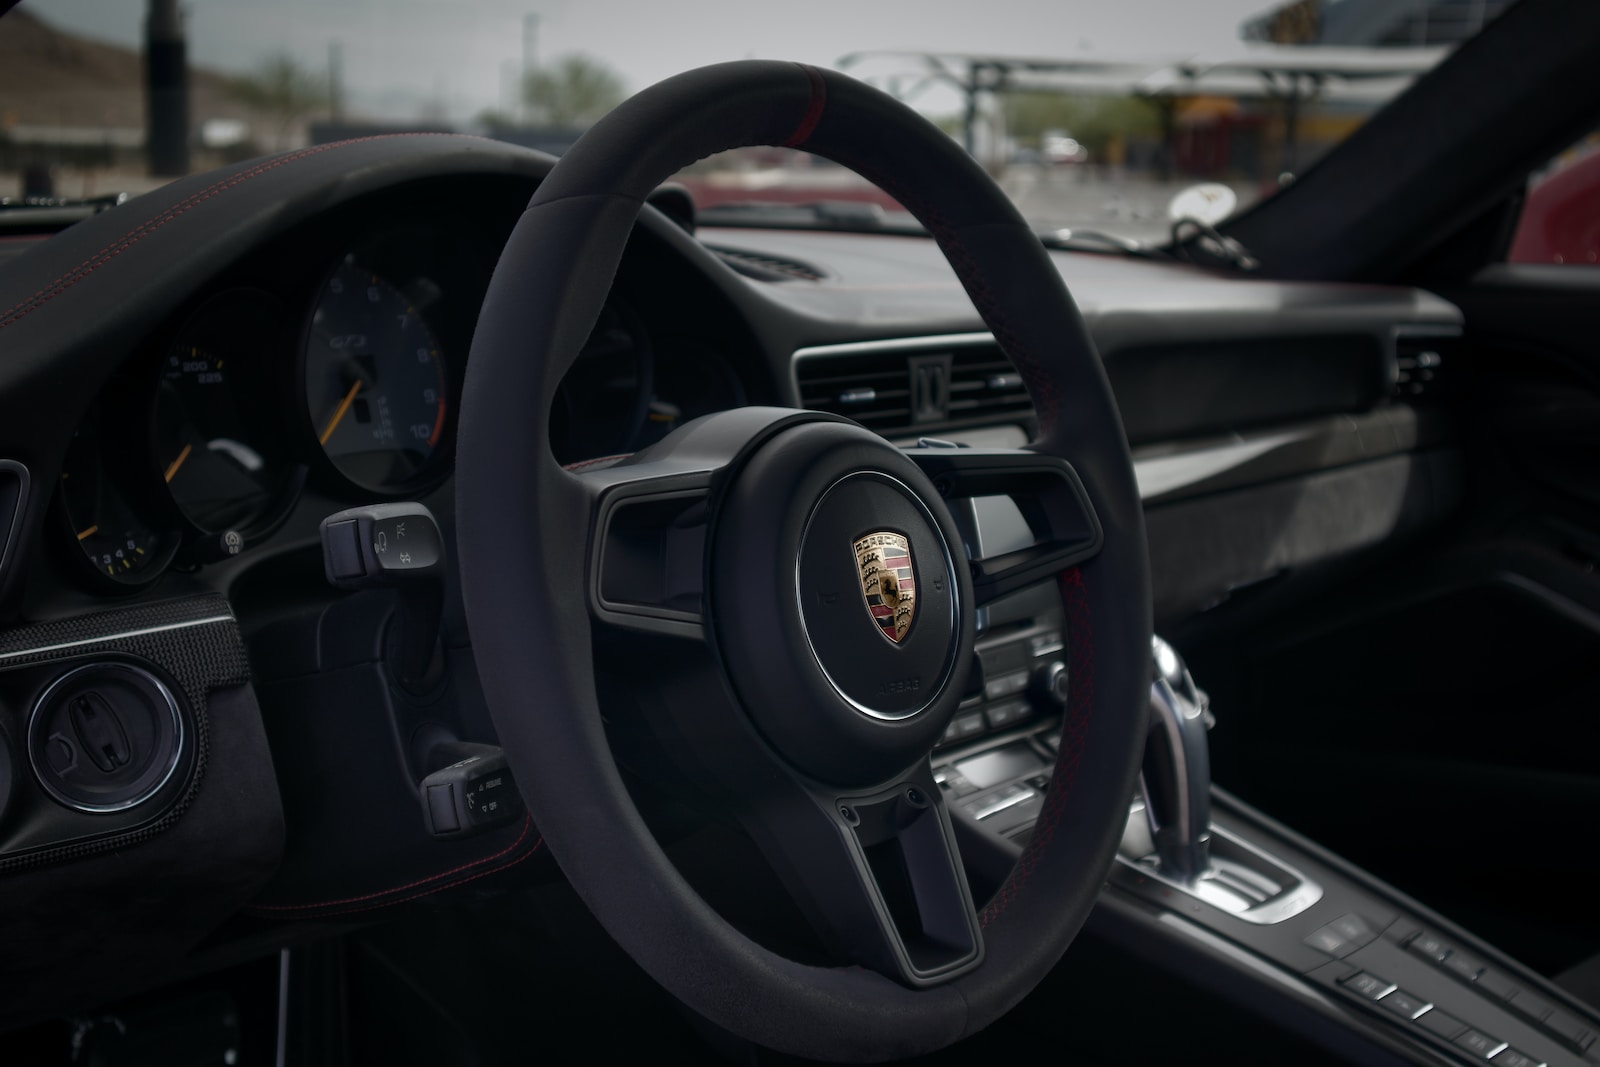 a close up of a steering wheel and dashboard of a car